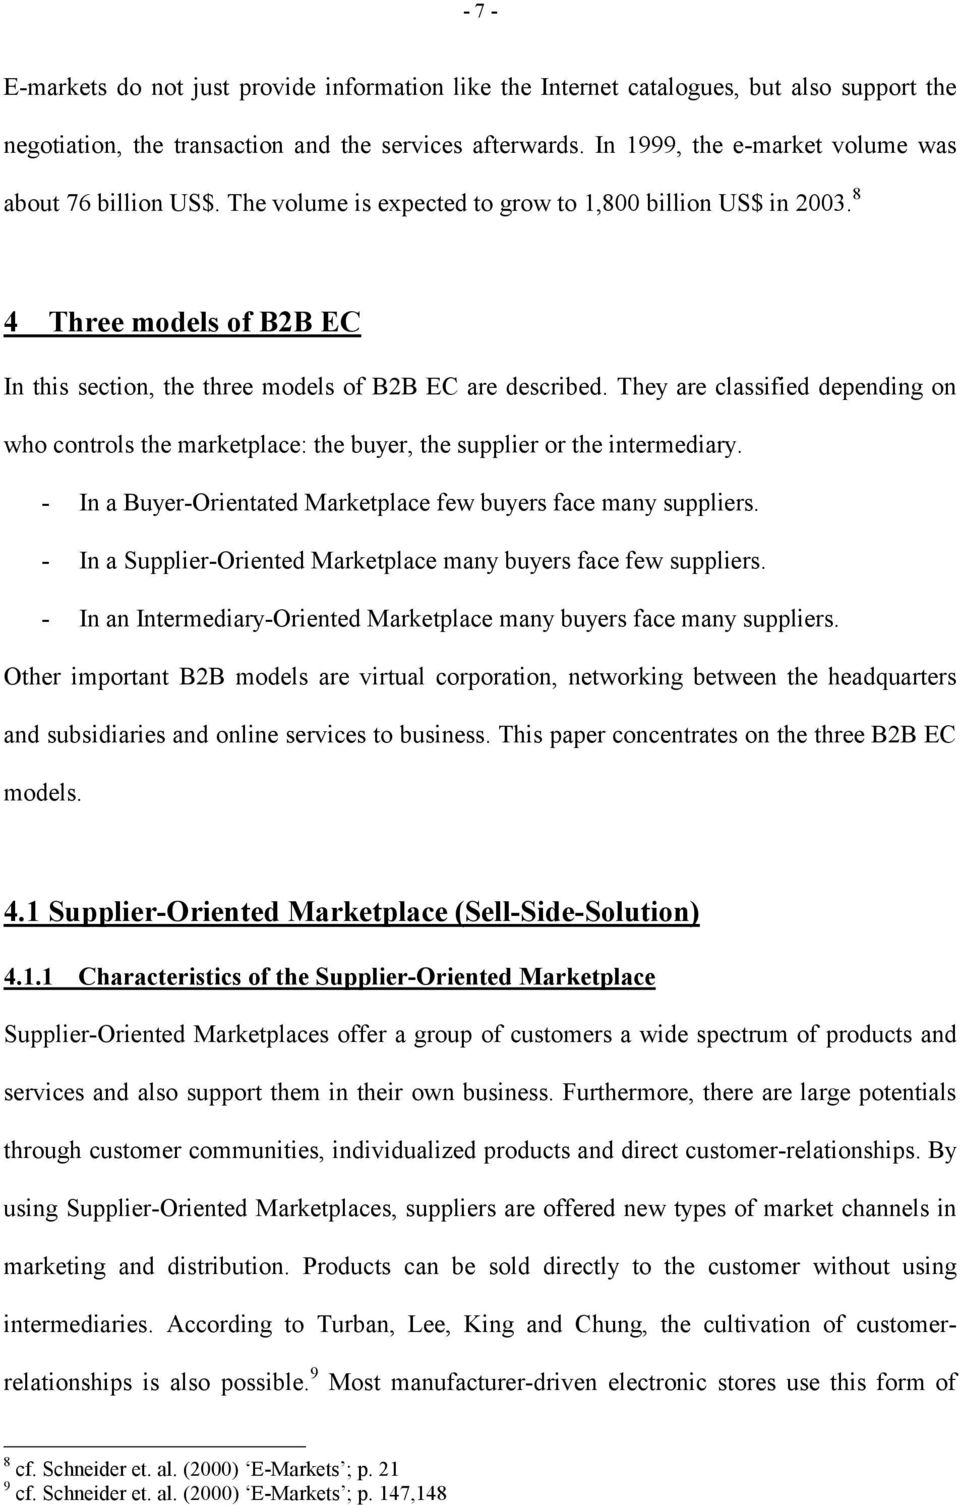 8 4 Three models of B2B EC In this section, the three models of B2B EC are described. They are classified depending on who controls the marketplace: the buyer, the supplier or the intermediary.